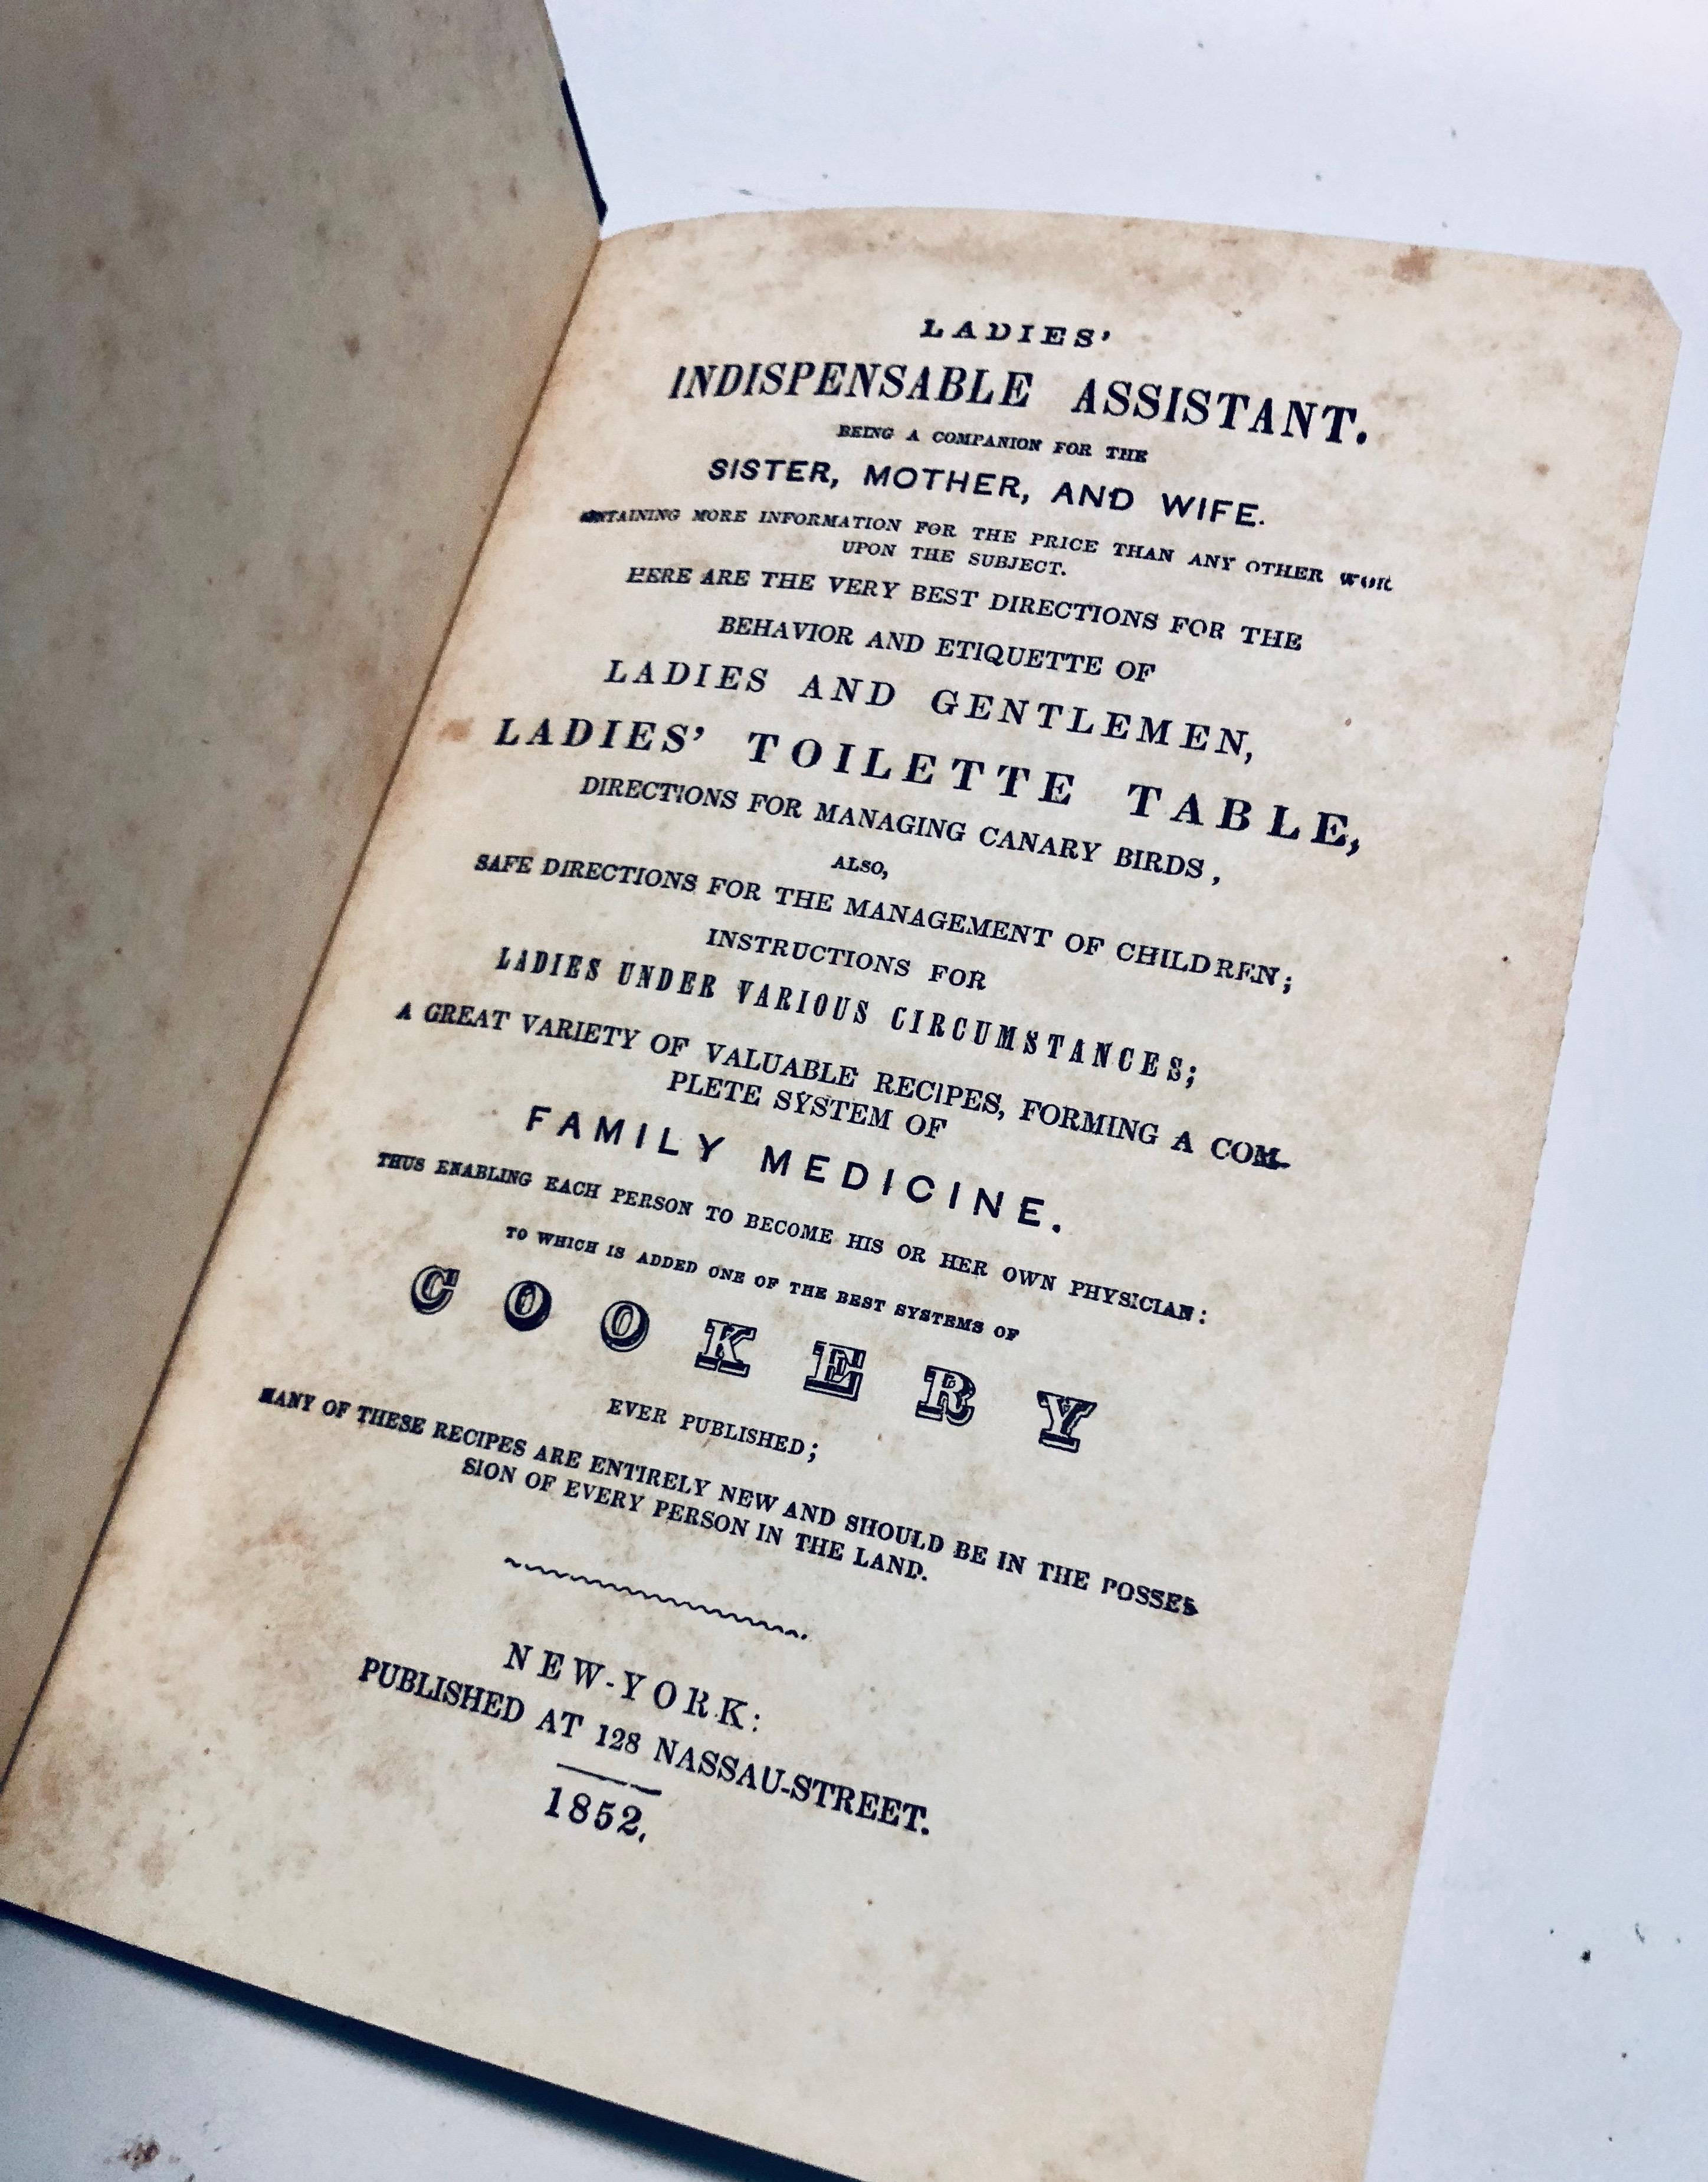 Ladies' Indispensable Assistant (1852) REPLICA - with Recipes and Family Medicine